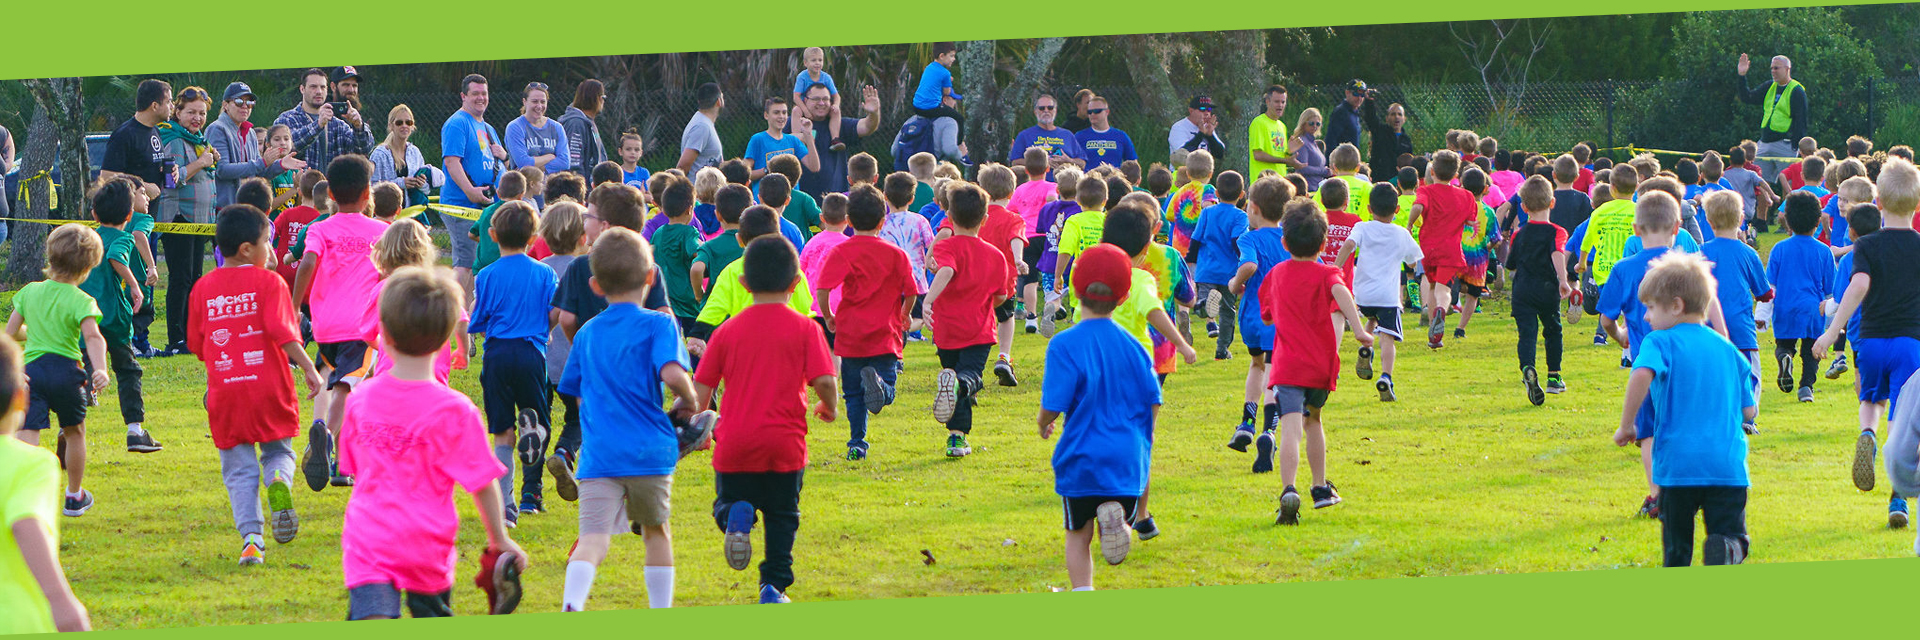 Children running at a cross country event